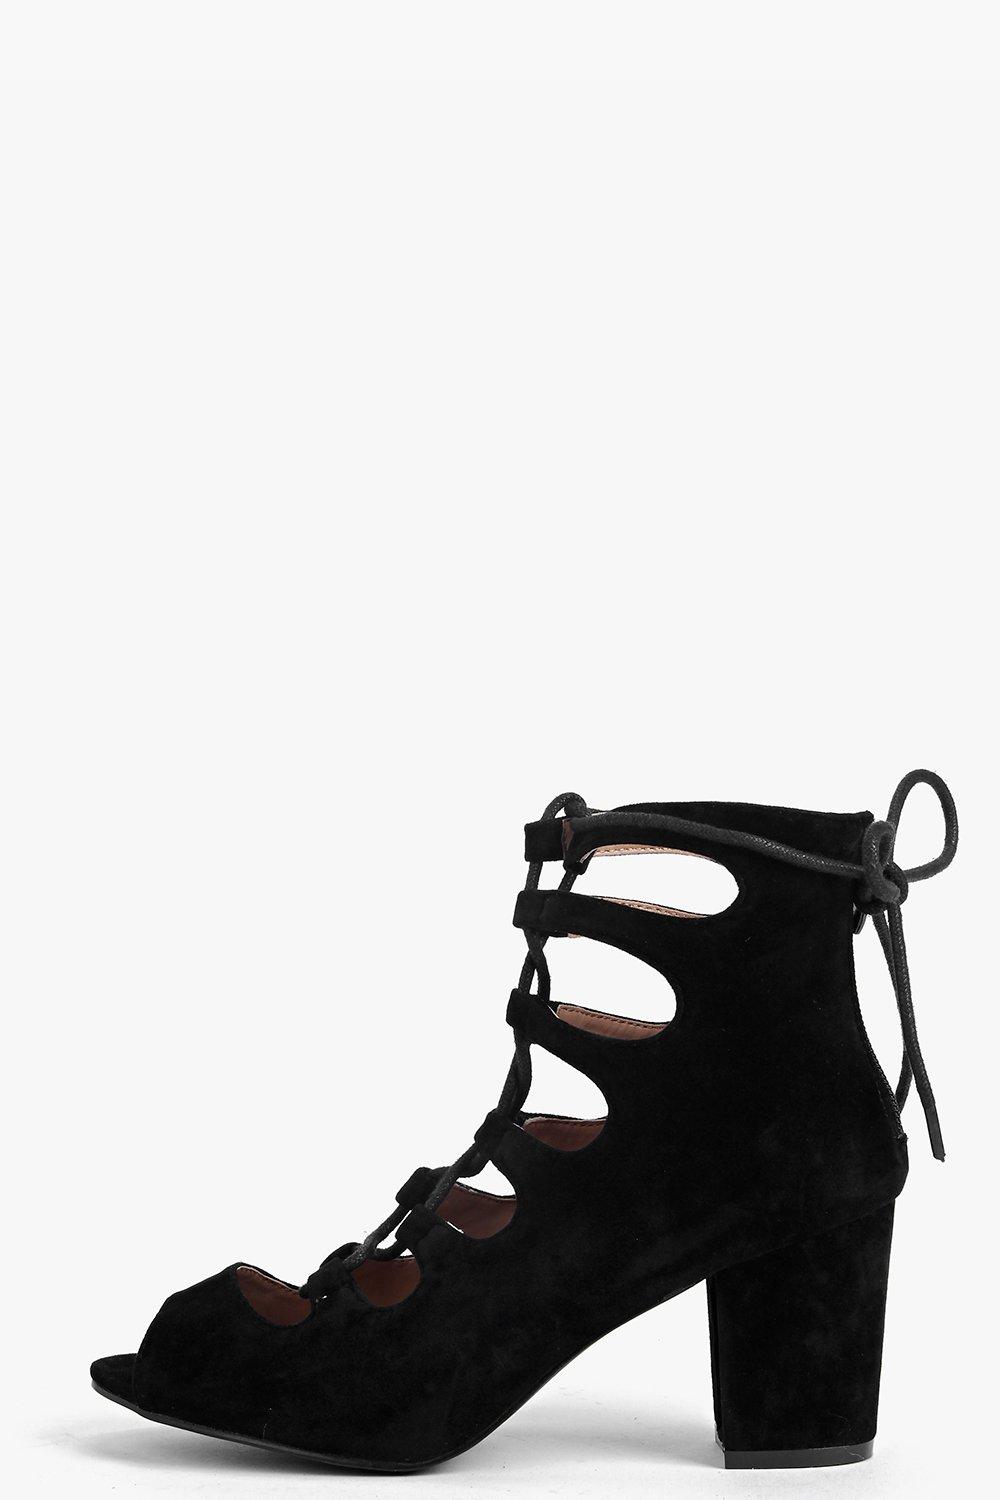 Alice Suedette Lace Up Mid Block Heel Shoe at boohoo.com